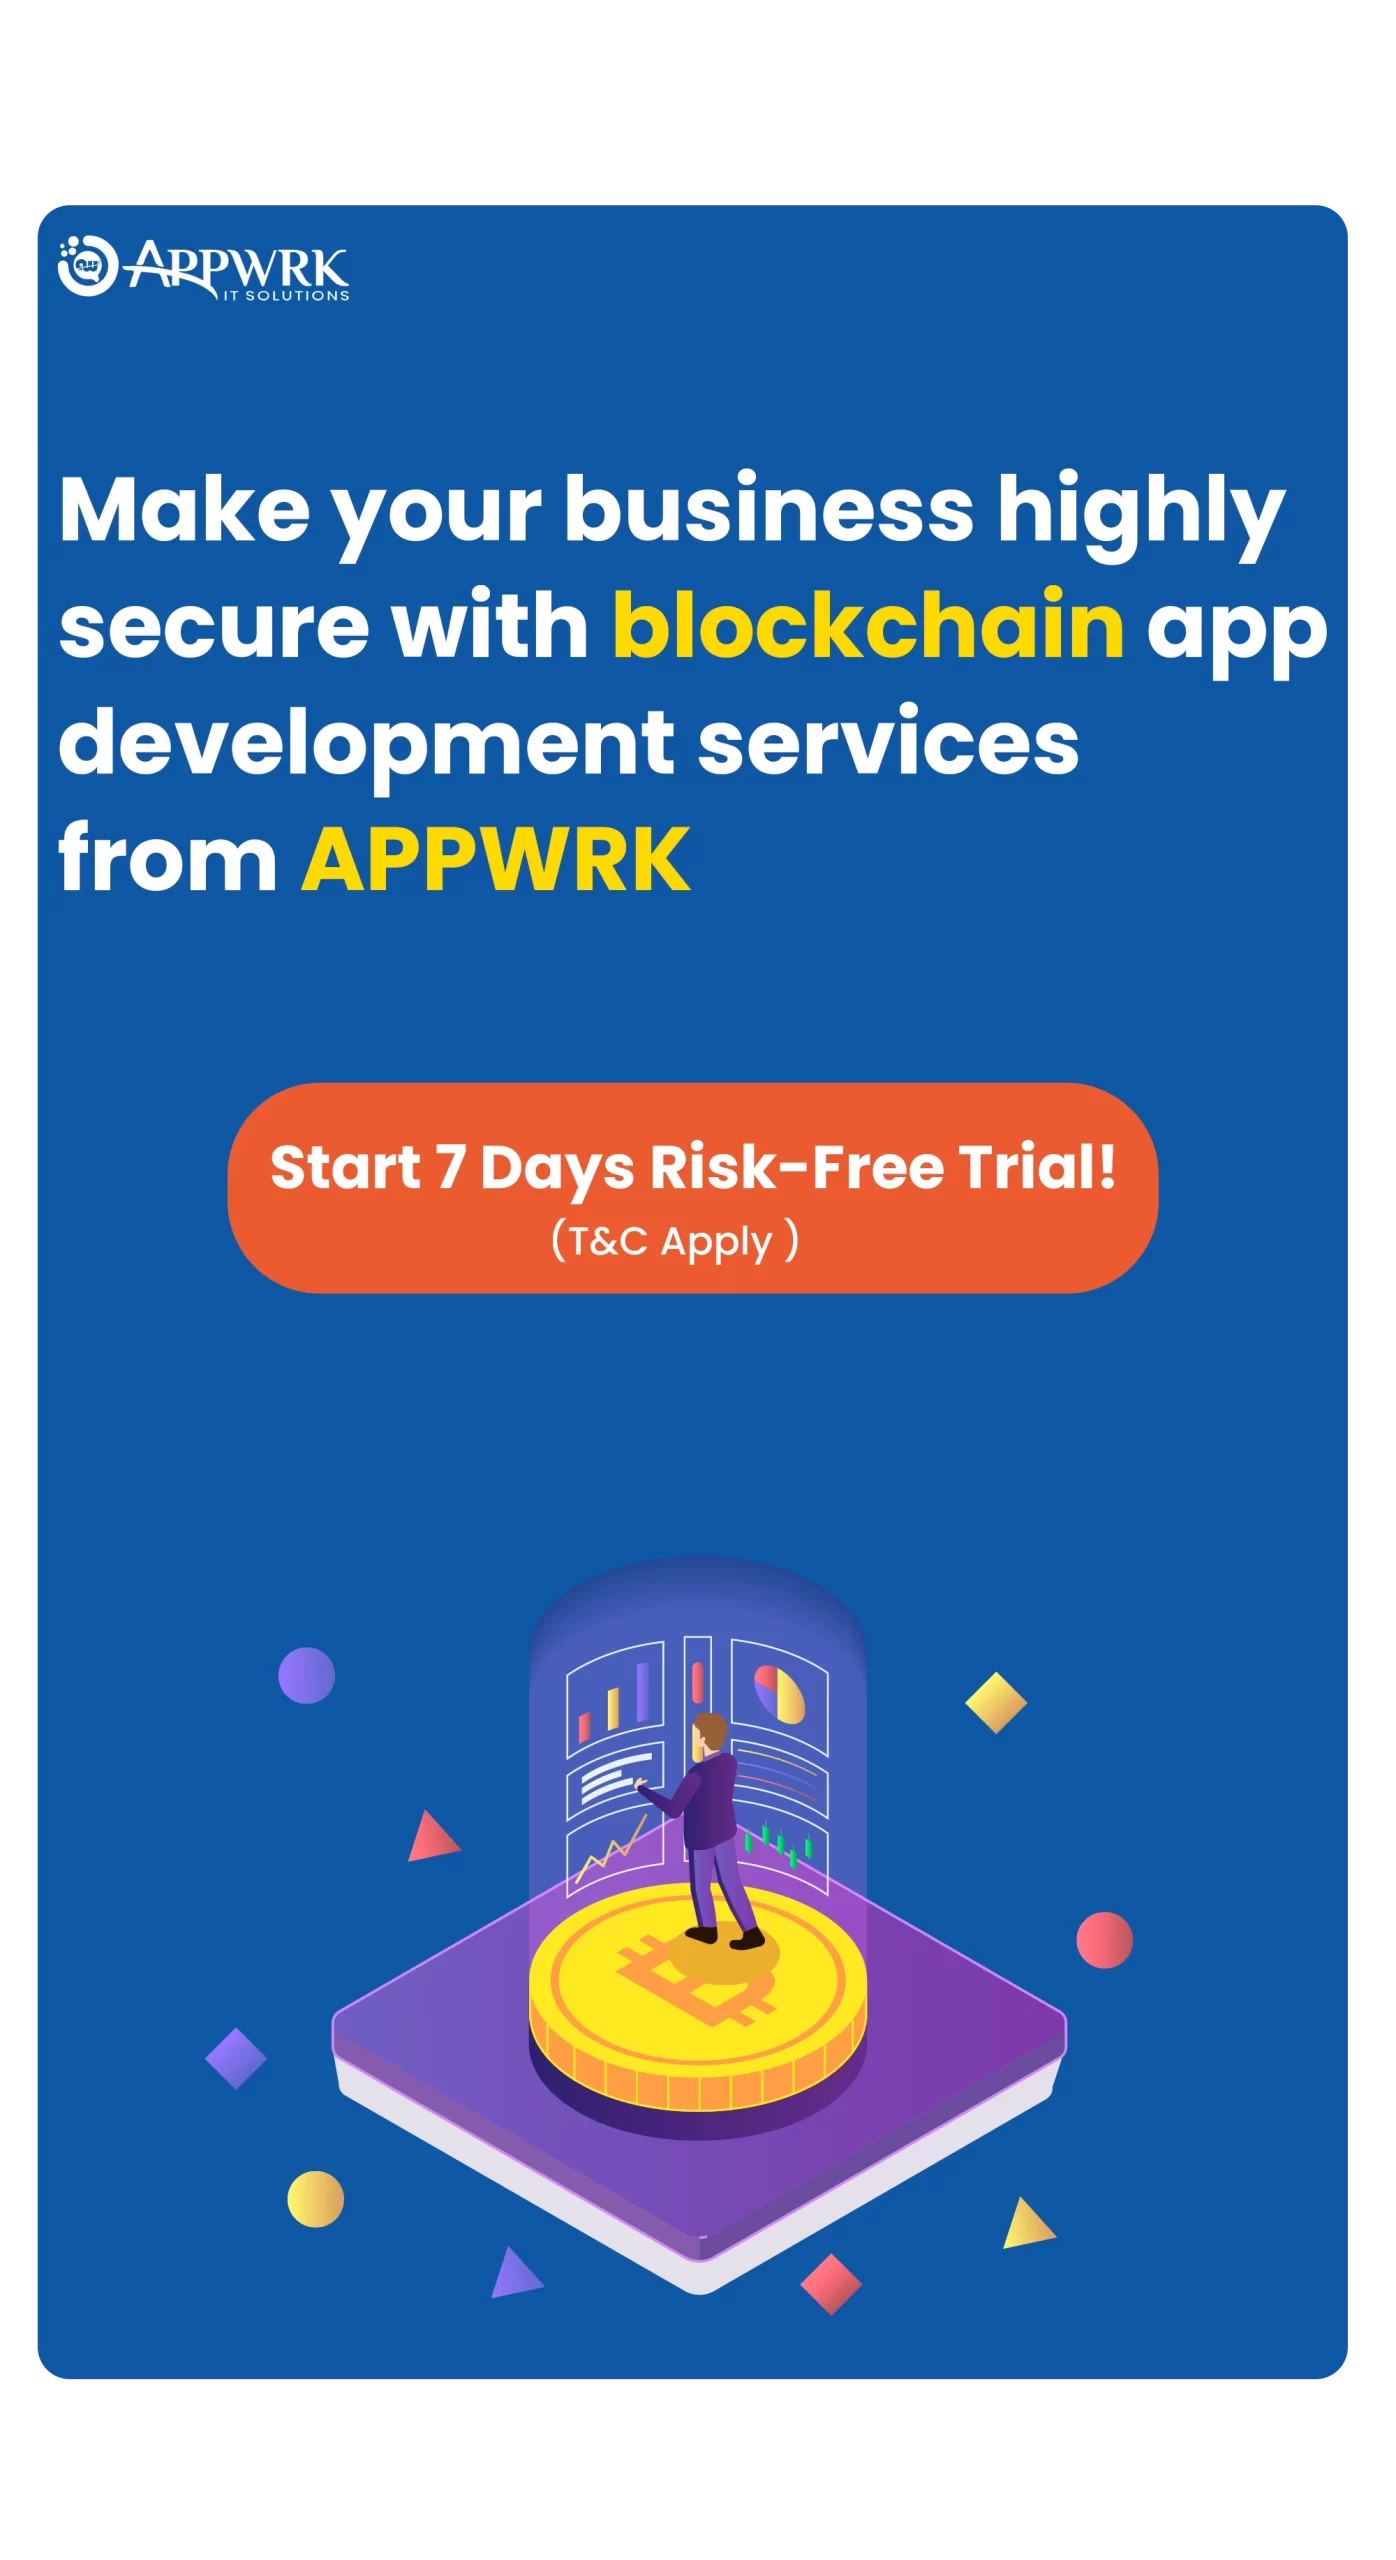 Make your business highly secure with blockchain app development services from APPWRK